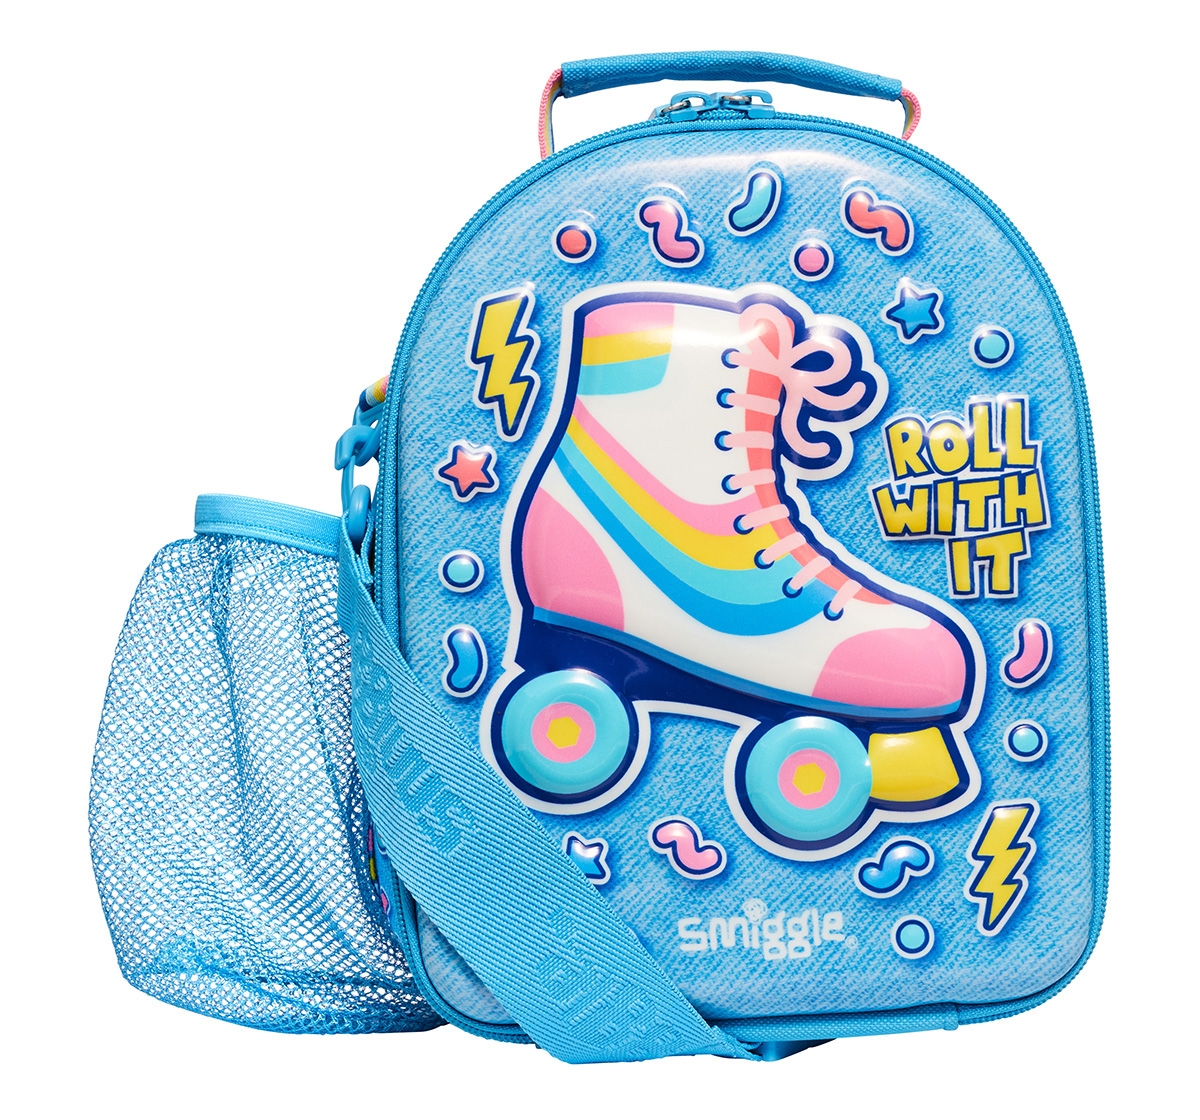 Smiggle | Smiggle Bright Side Hardtop Lunch Box With Strap for kids 3Y+, Multicolour